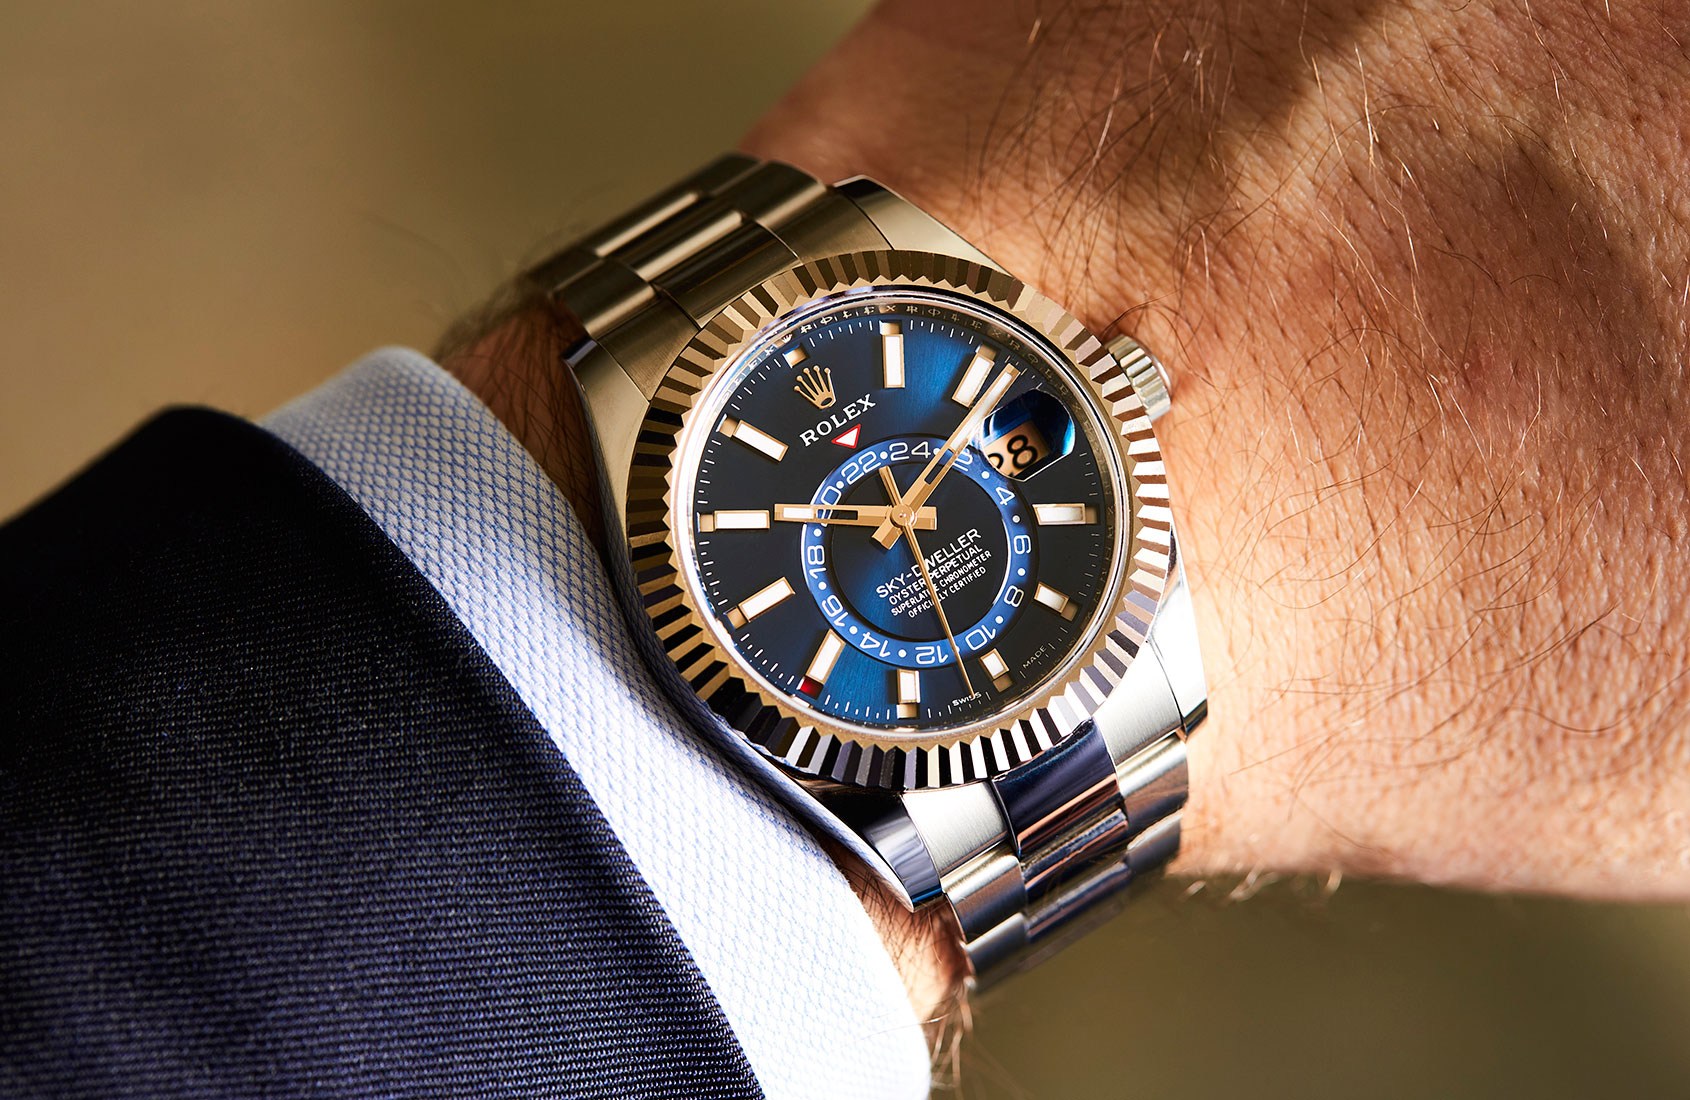 The Rolex Sky-Dweller in steel and 